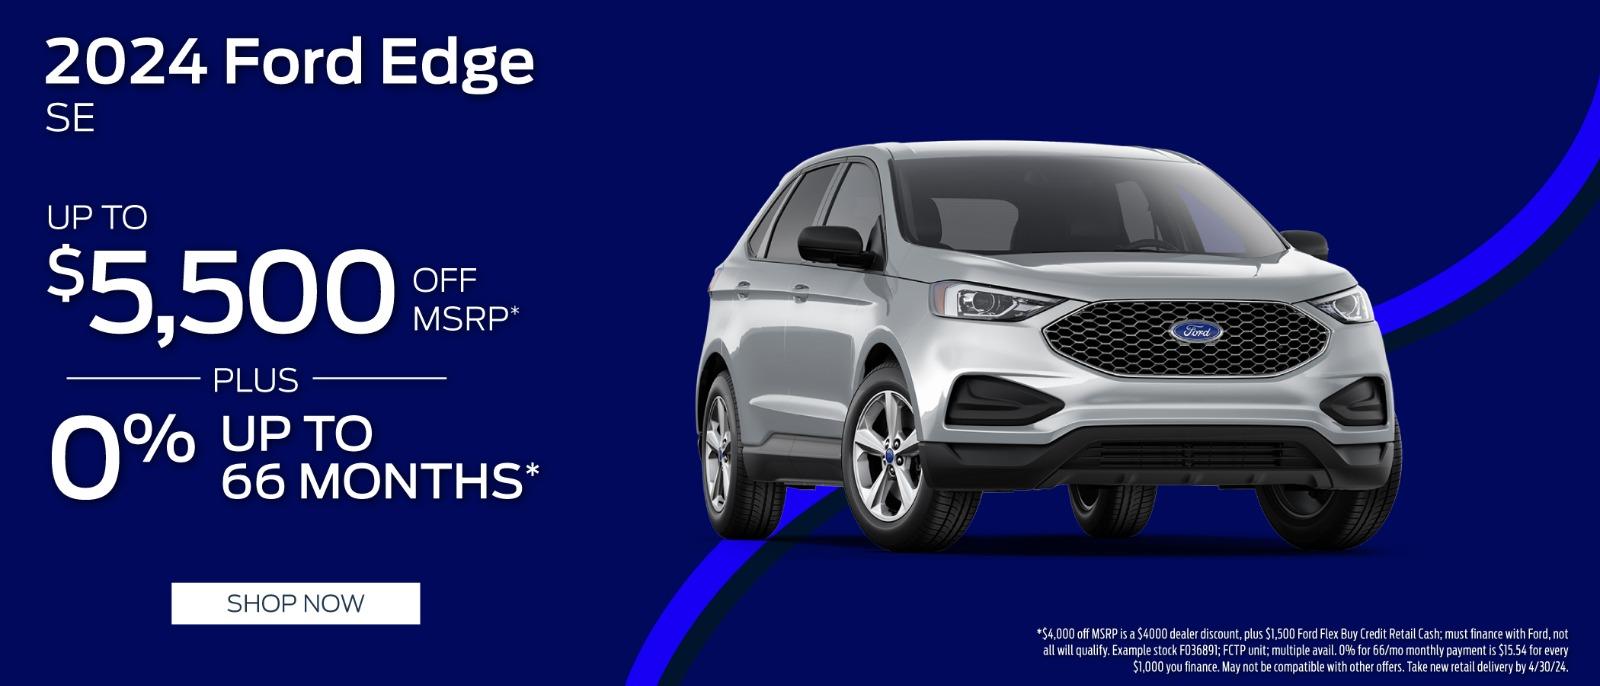 2024 Ford Edge $5,500 off MSRP plus .0% up to 66 months